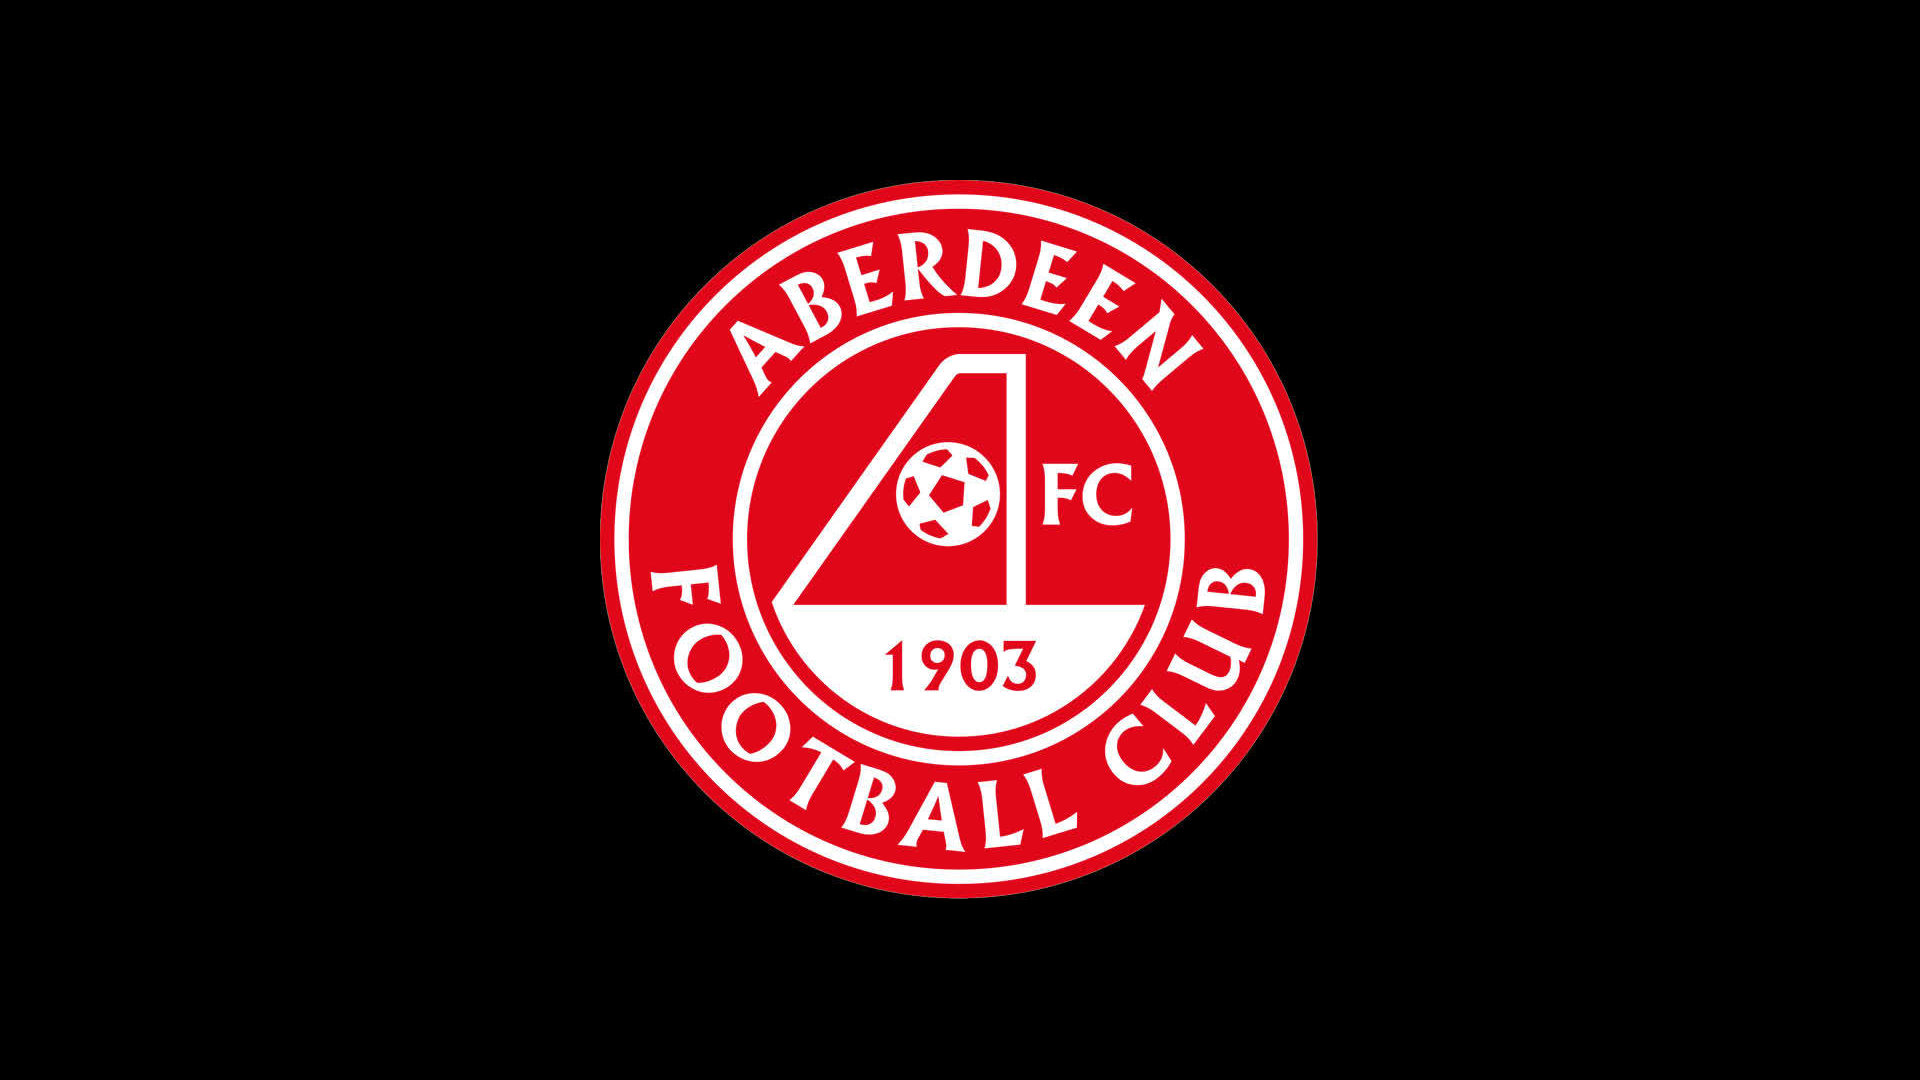 afl aberdeen appointed stadium review architects football club